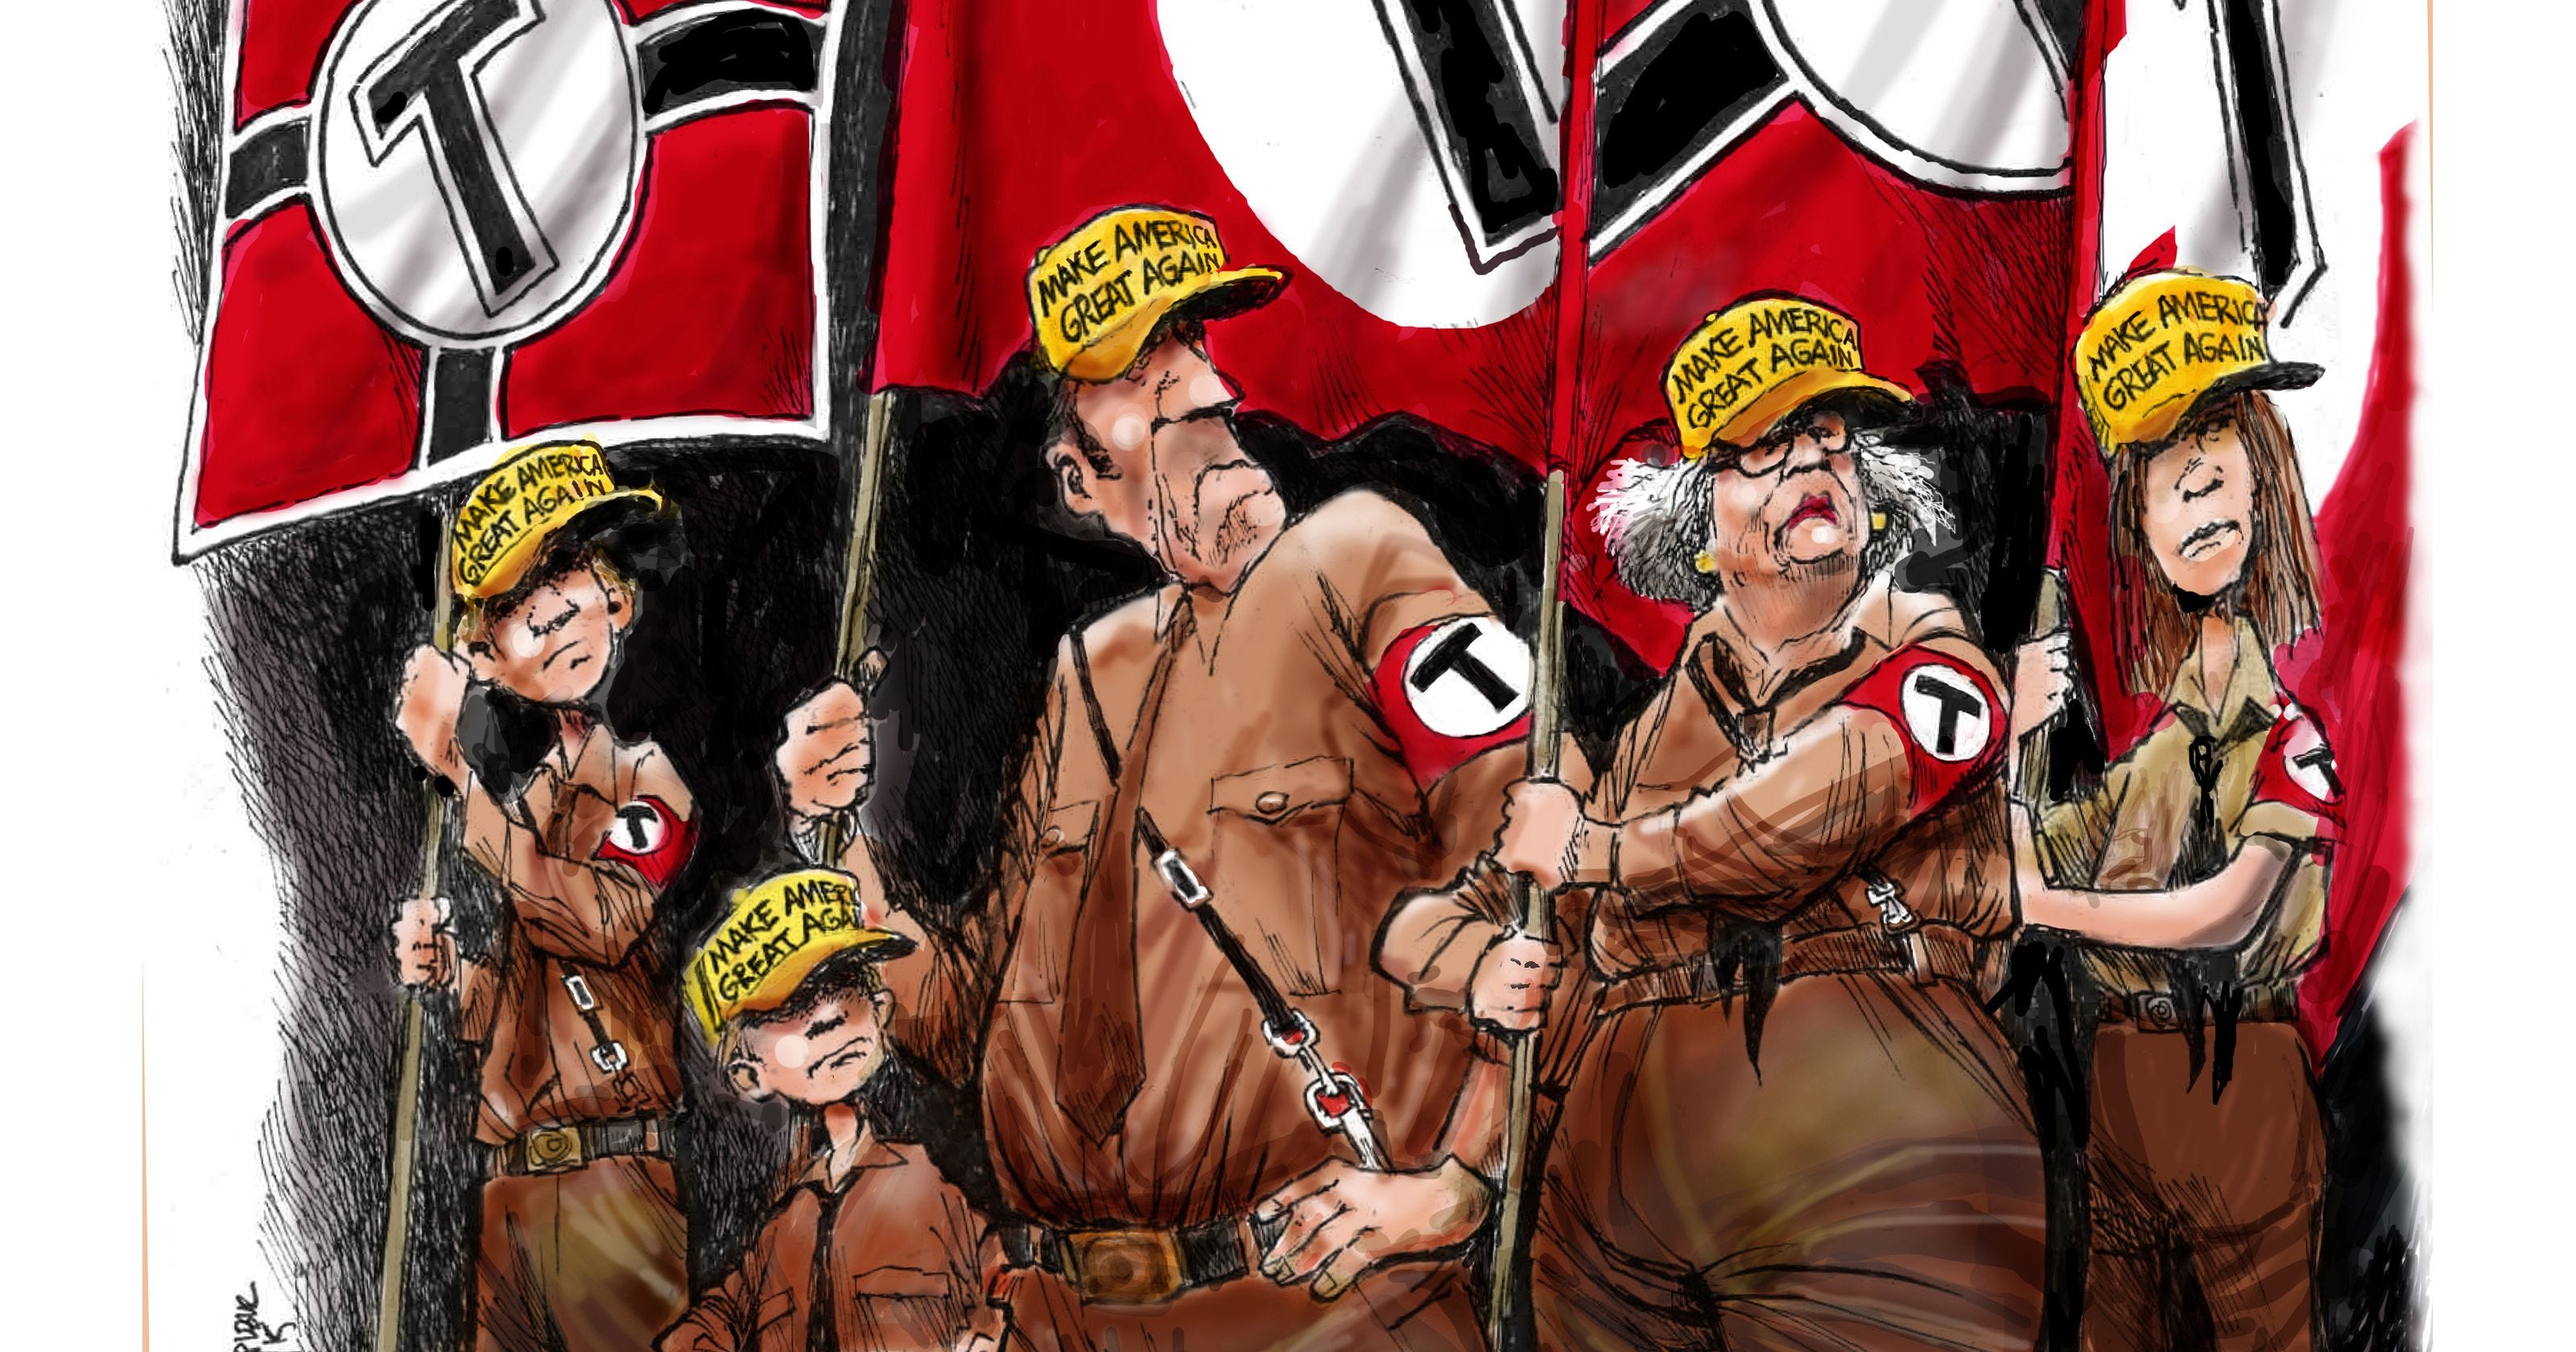 Trump Supporters: Today's Nazi Brown 